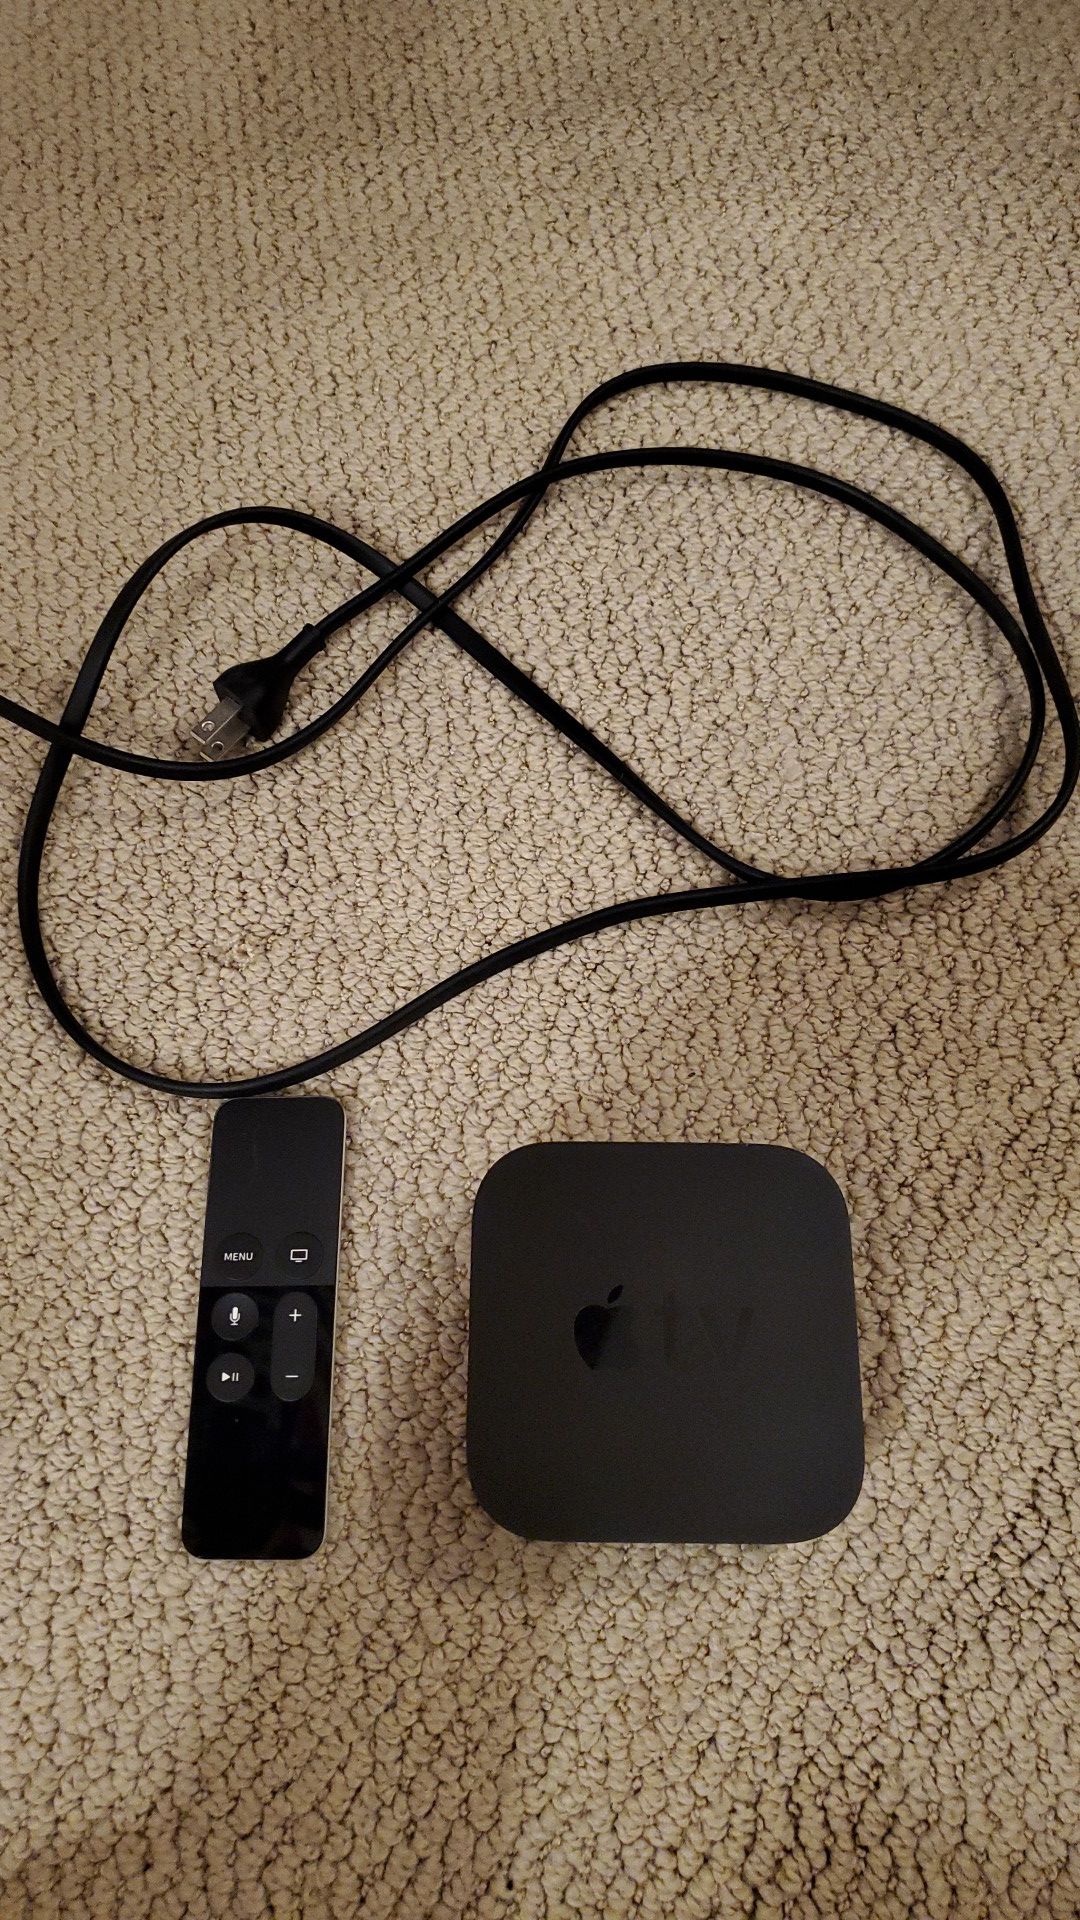 Apple TV 4th gen unlocked and wiped